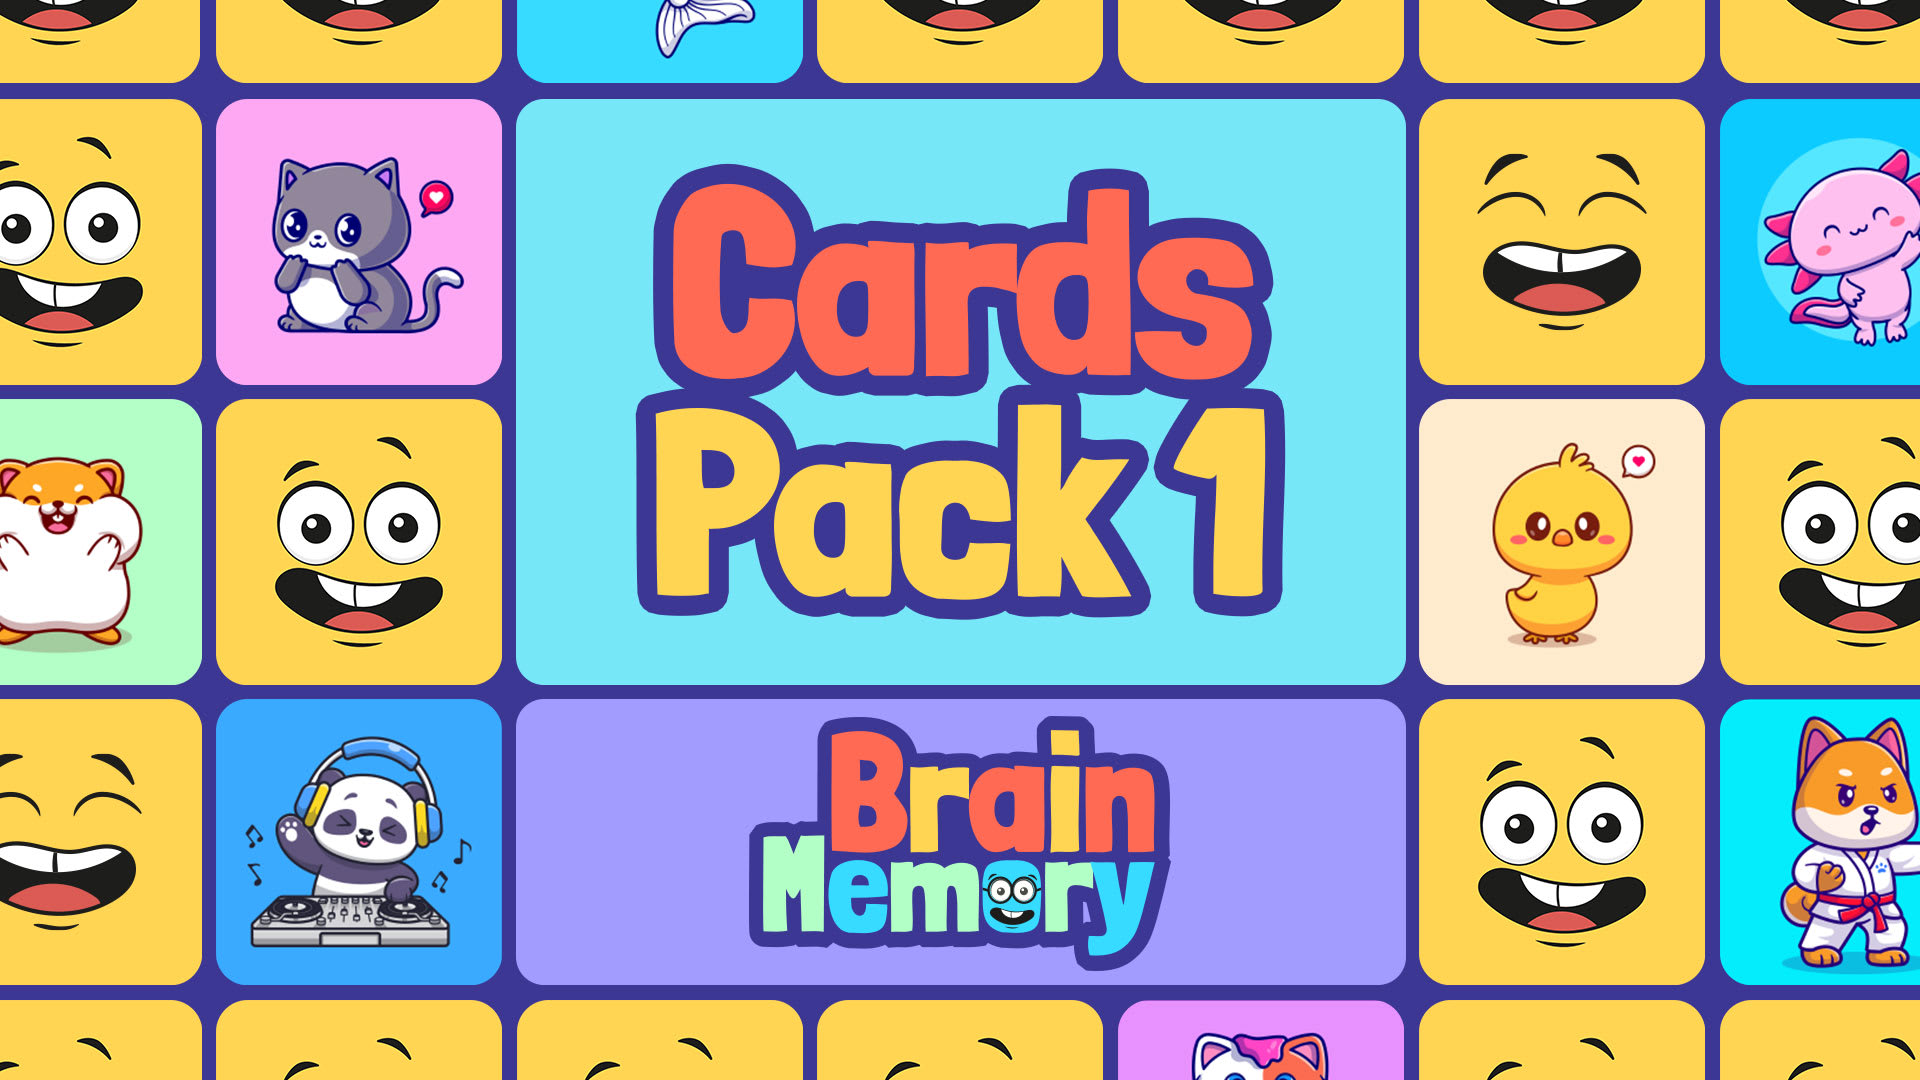 Cards Pack 1